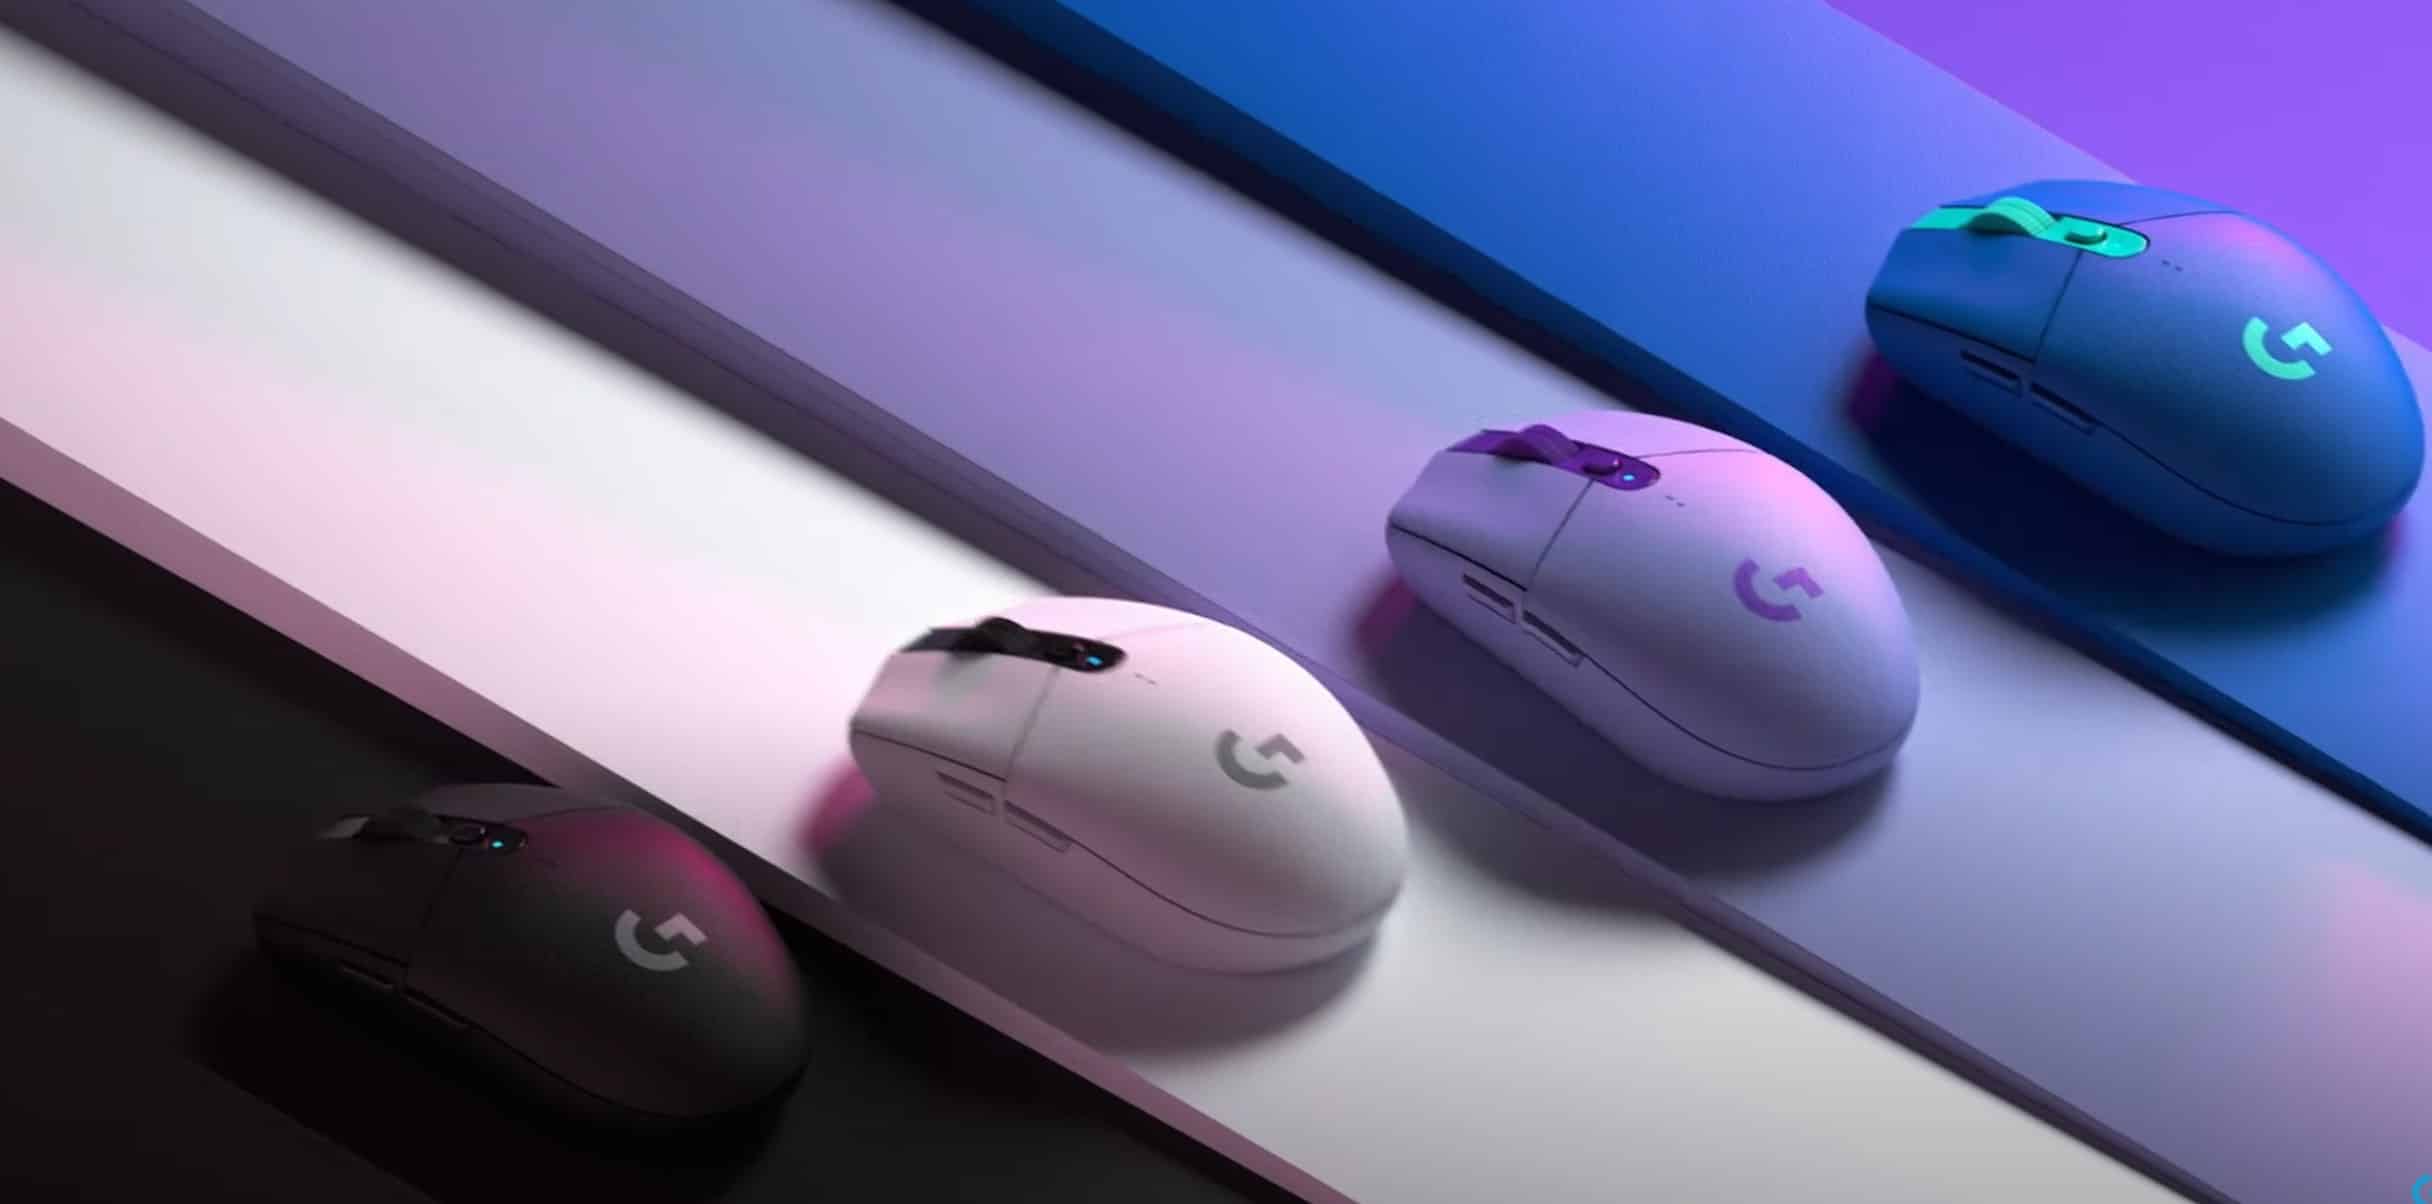 8 Best Gaming Mice of 2023 [Tested and Reviewed]